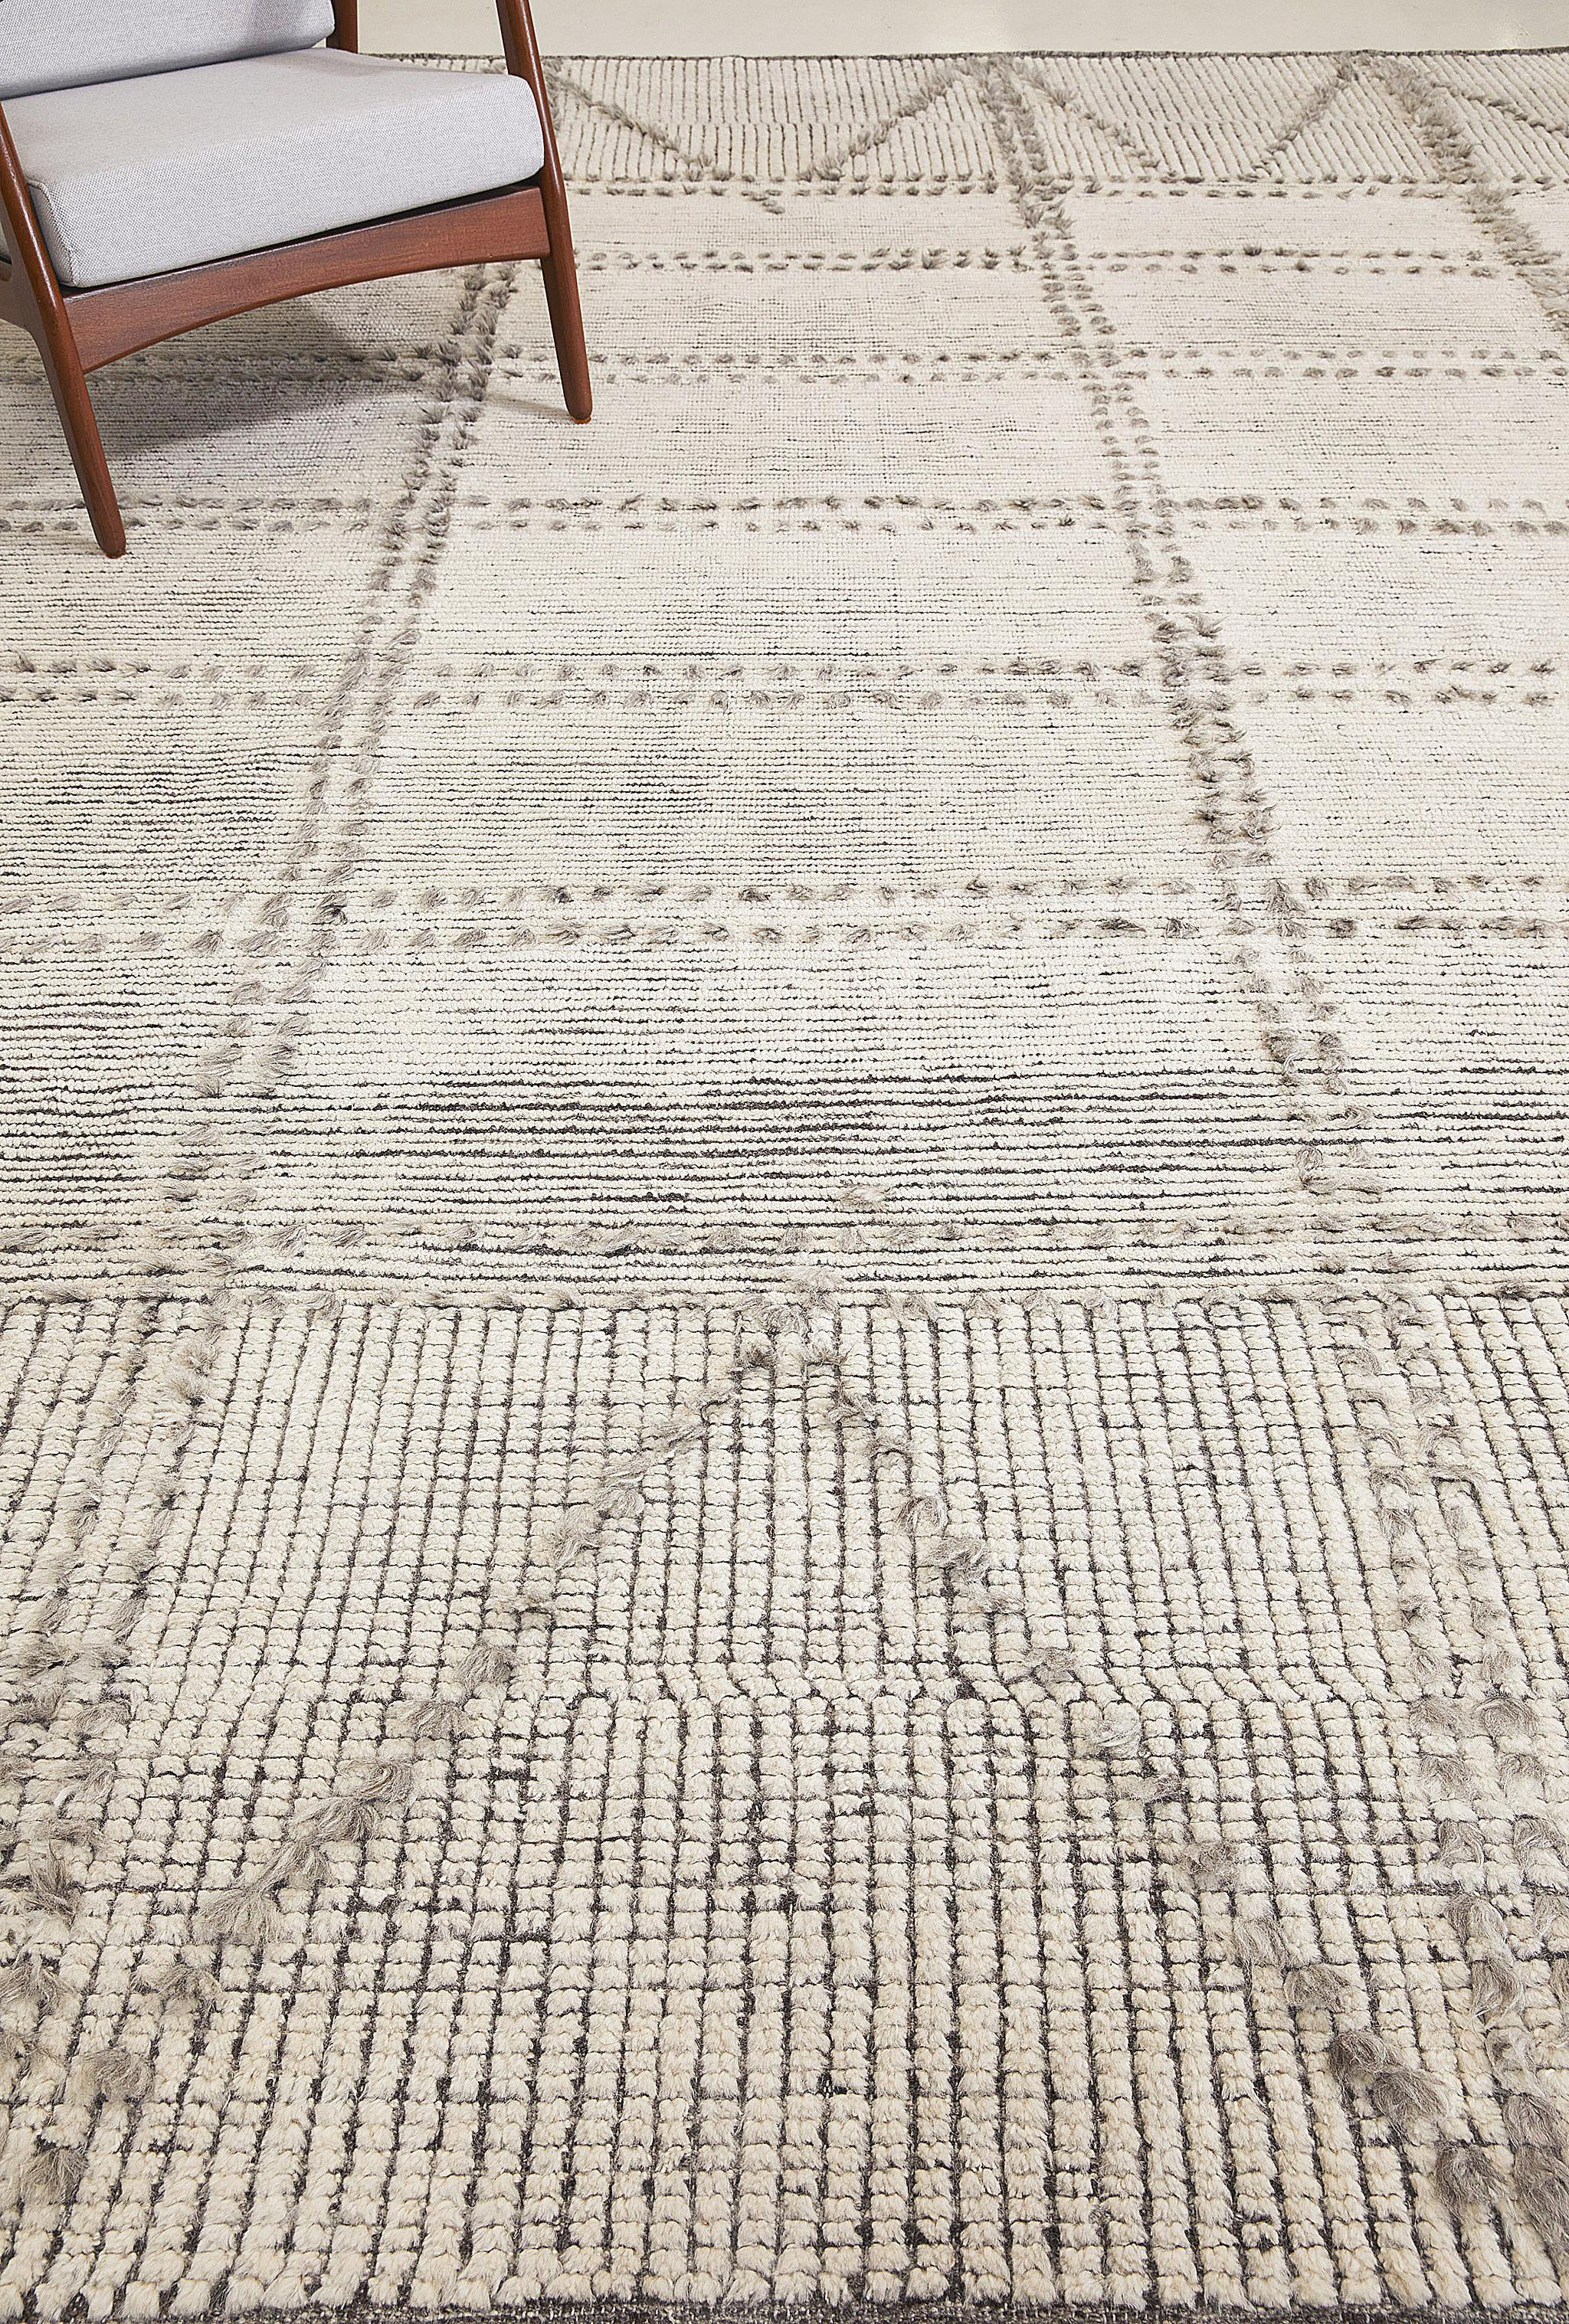 Valdepena’s long knots contrast with trim ribbed pile creating a harmony of texture and color. A linear motif finished in diagonal zags at top and bottom.

Here in dappled gray.

The Estancia Collection by Mehraban is a group of casually